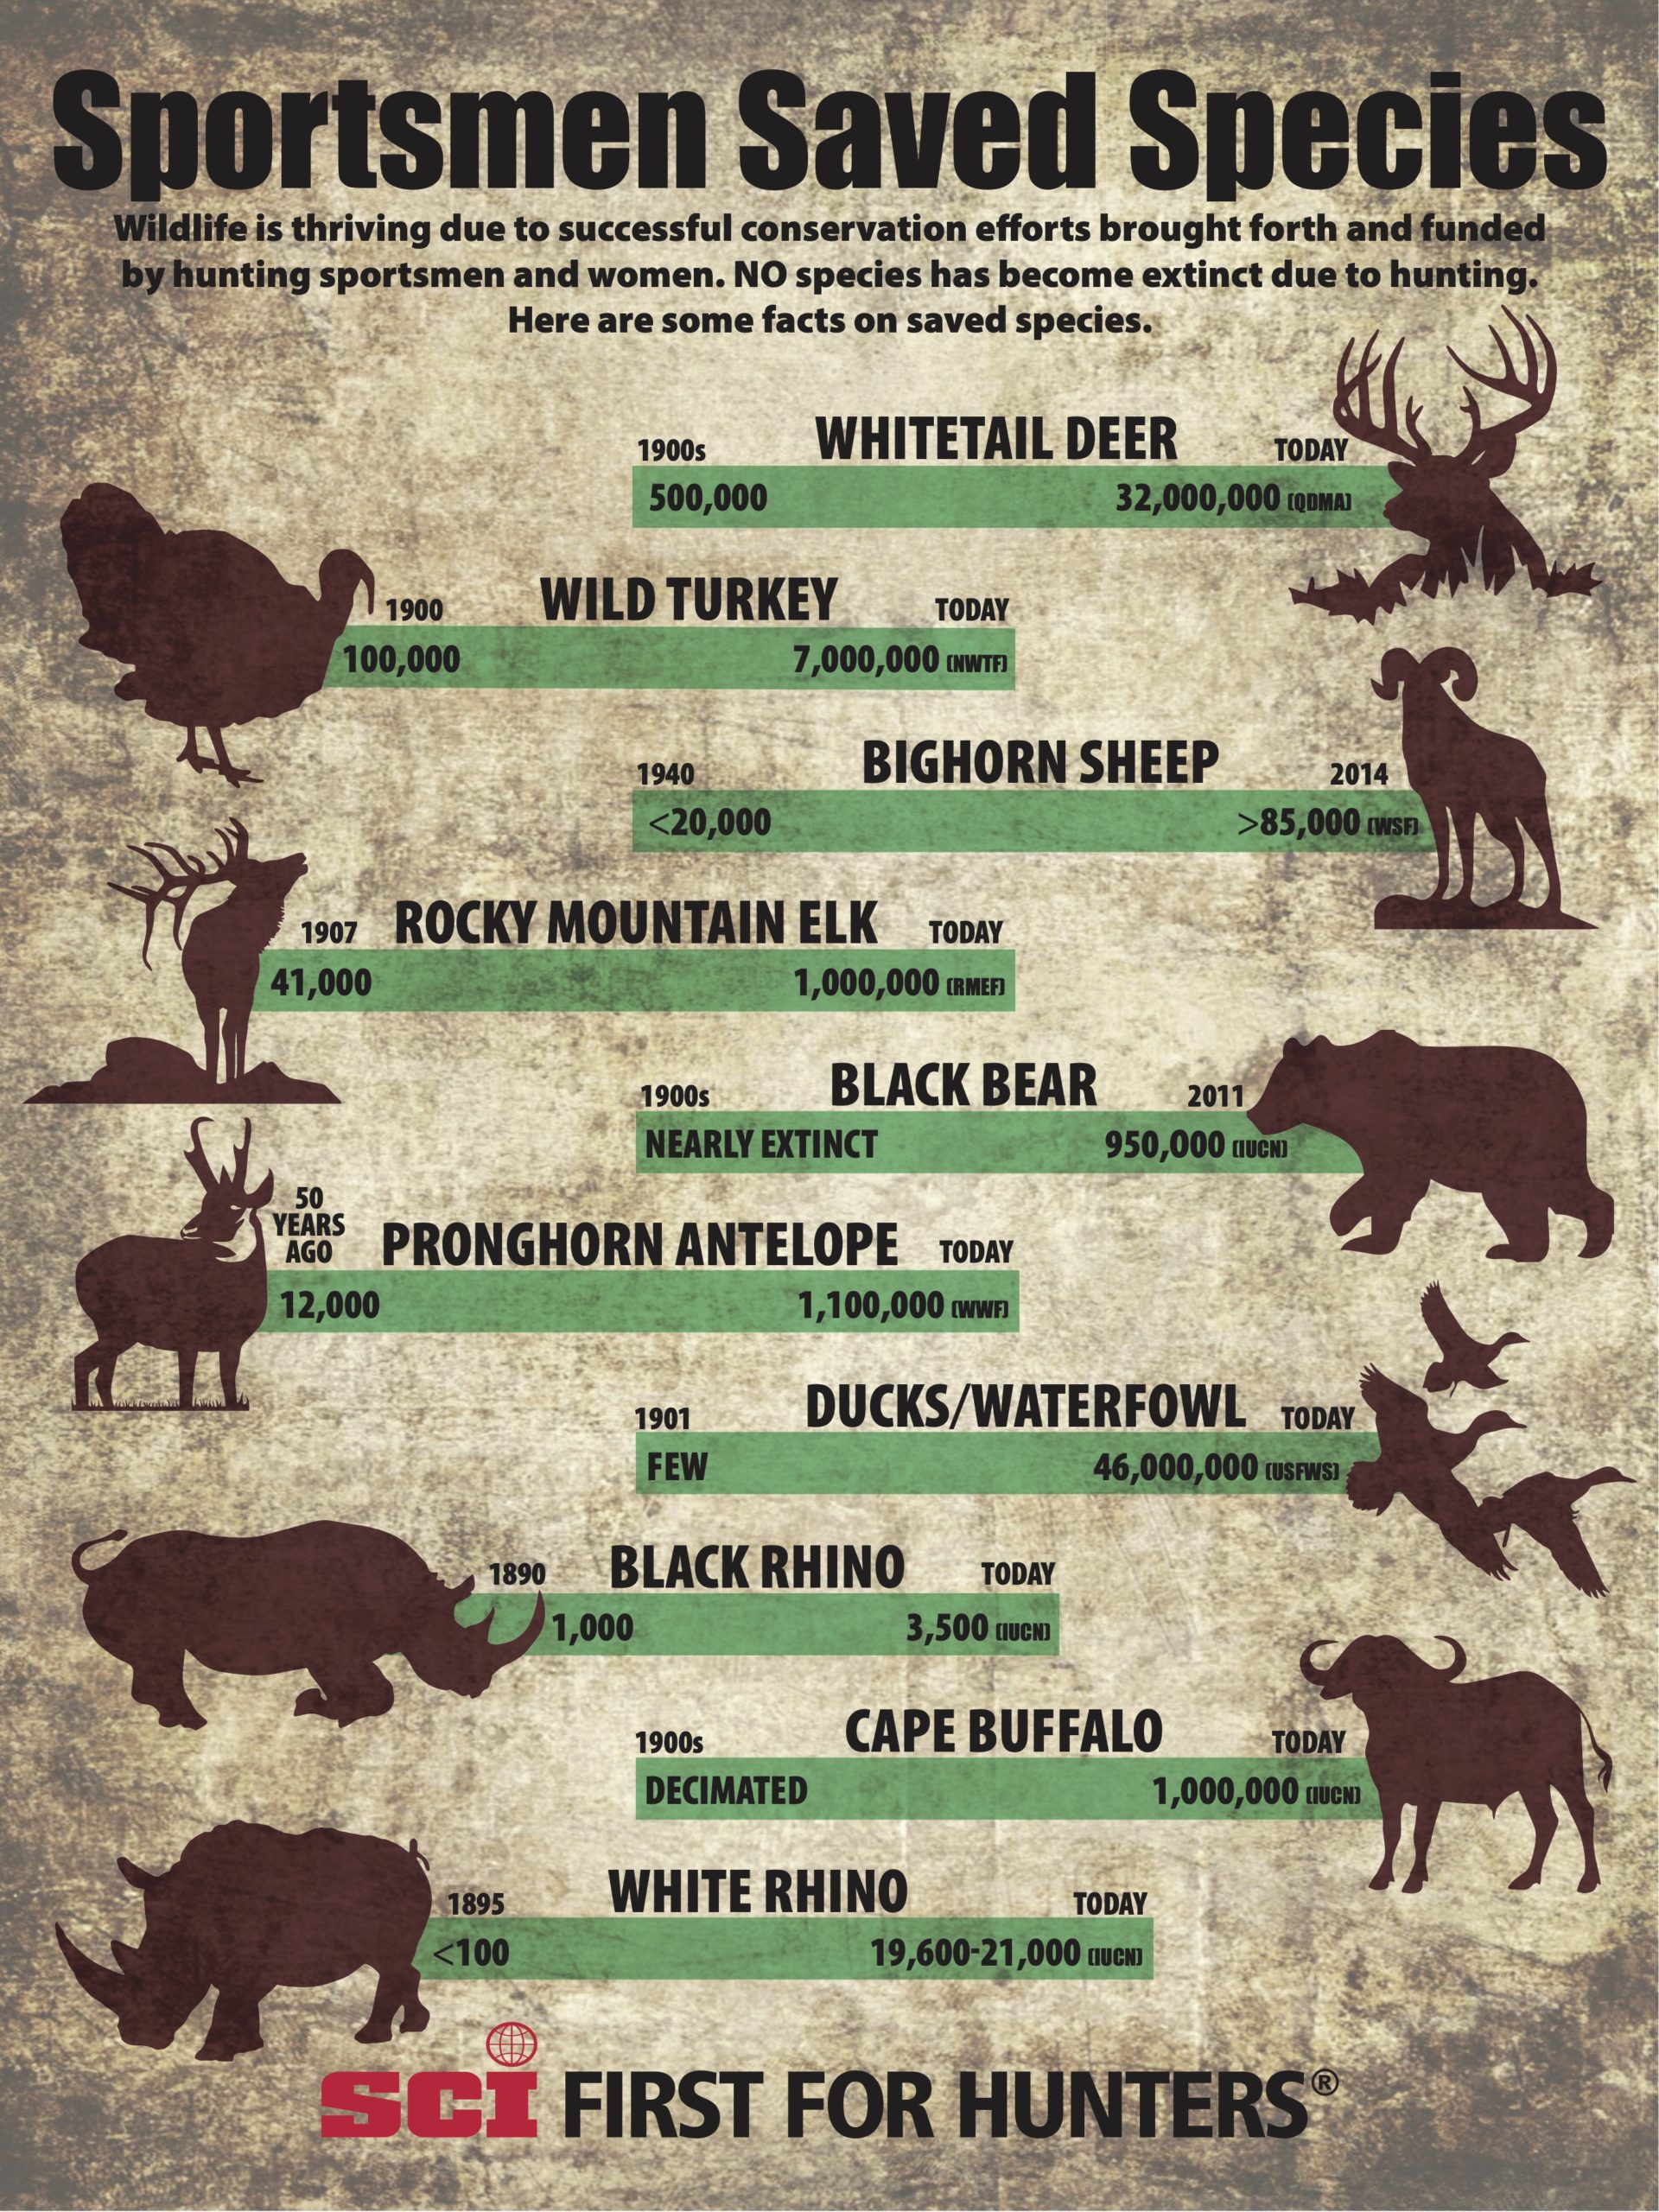 Hunt The Facts / Species Conservation - Safari Club